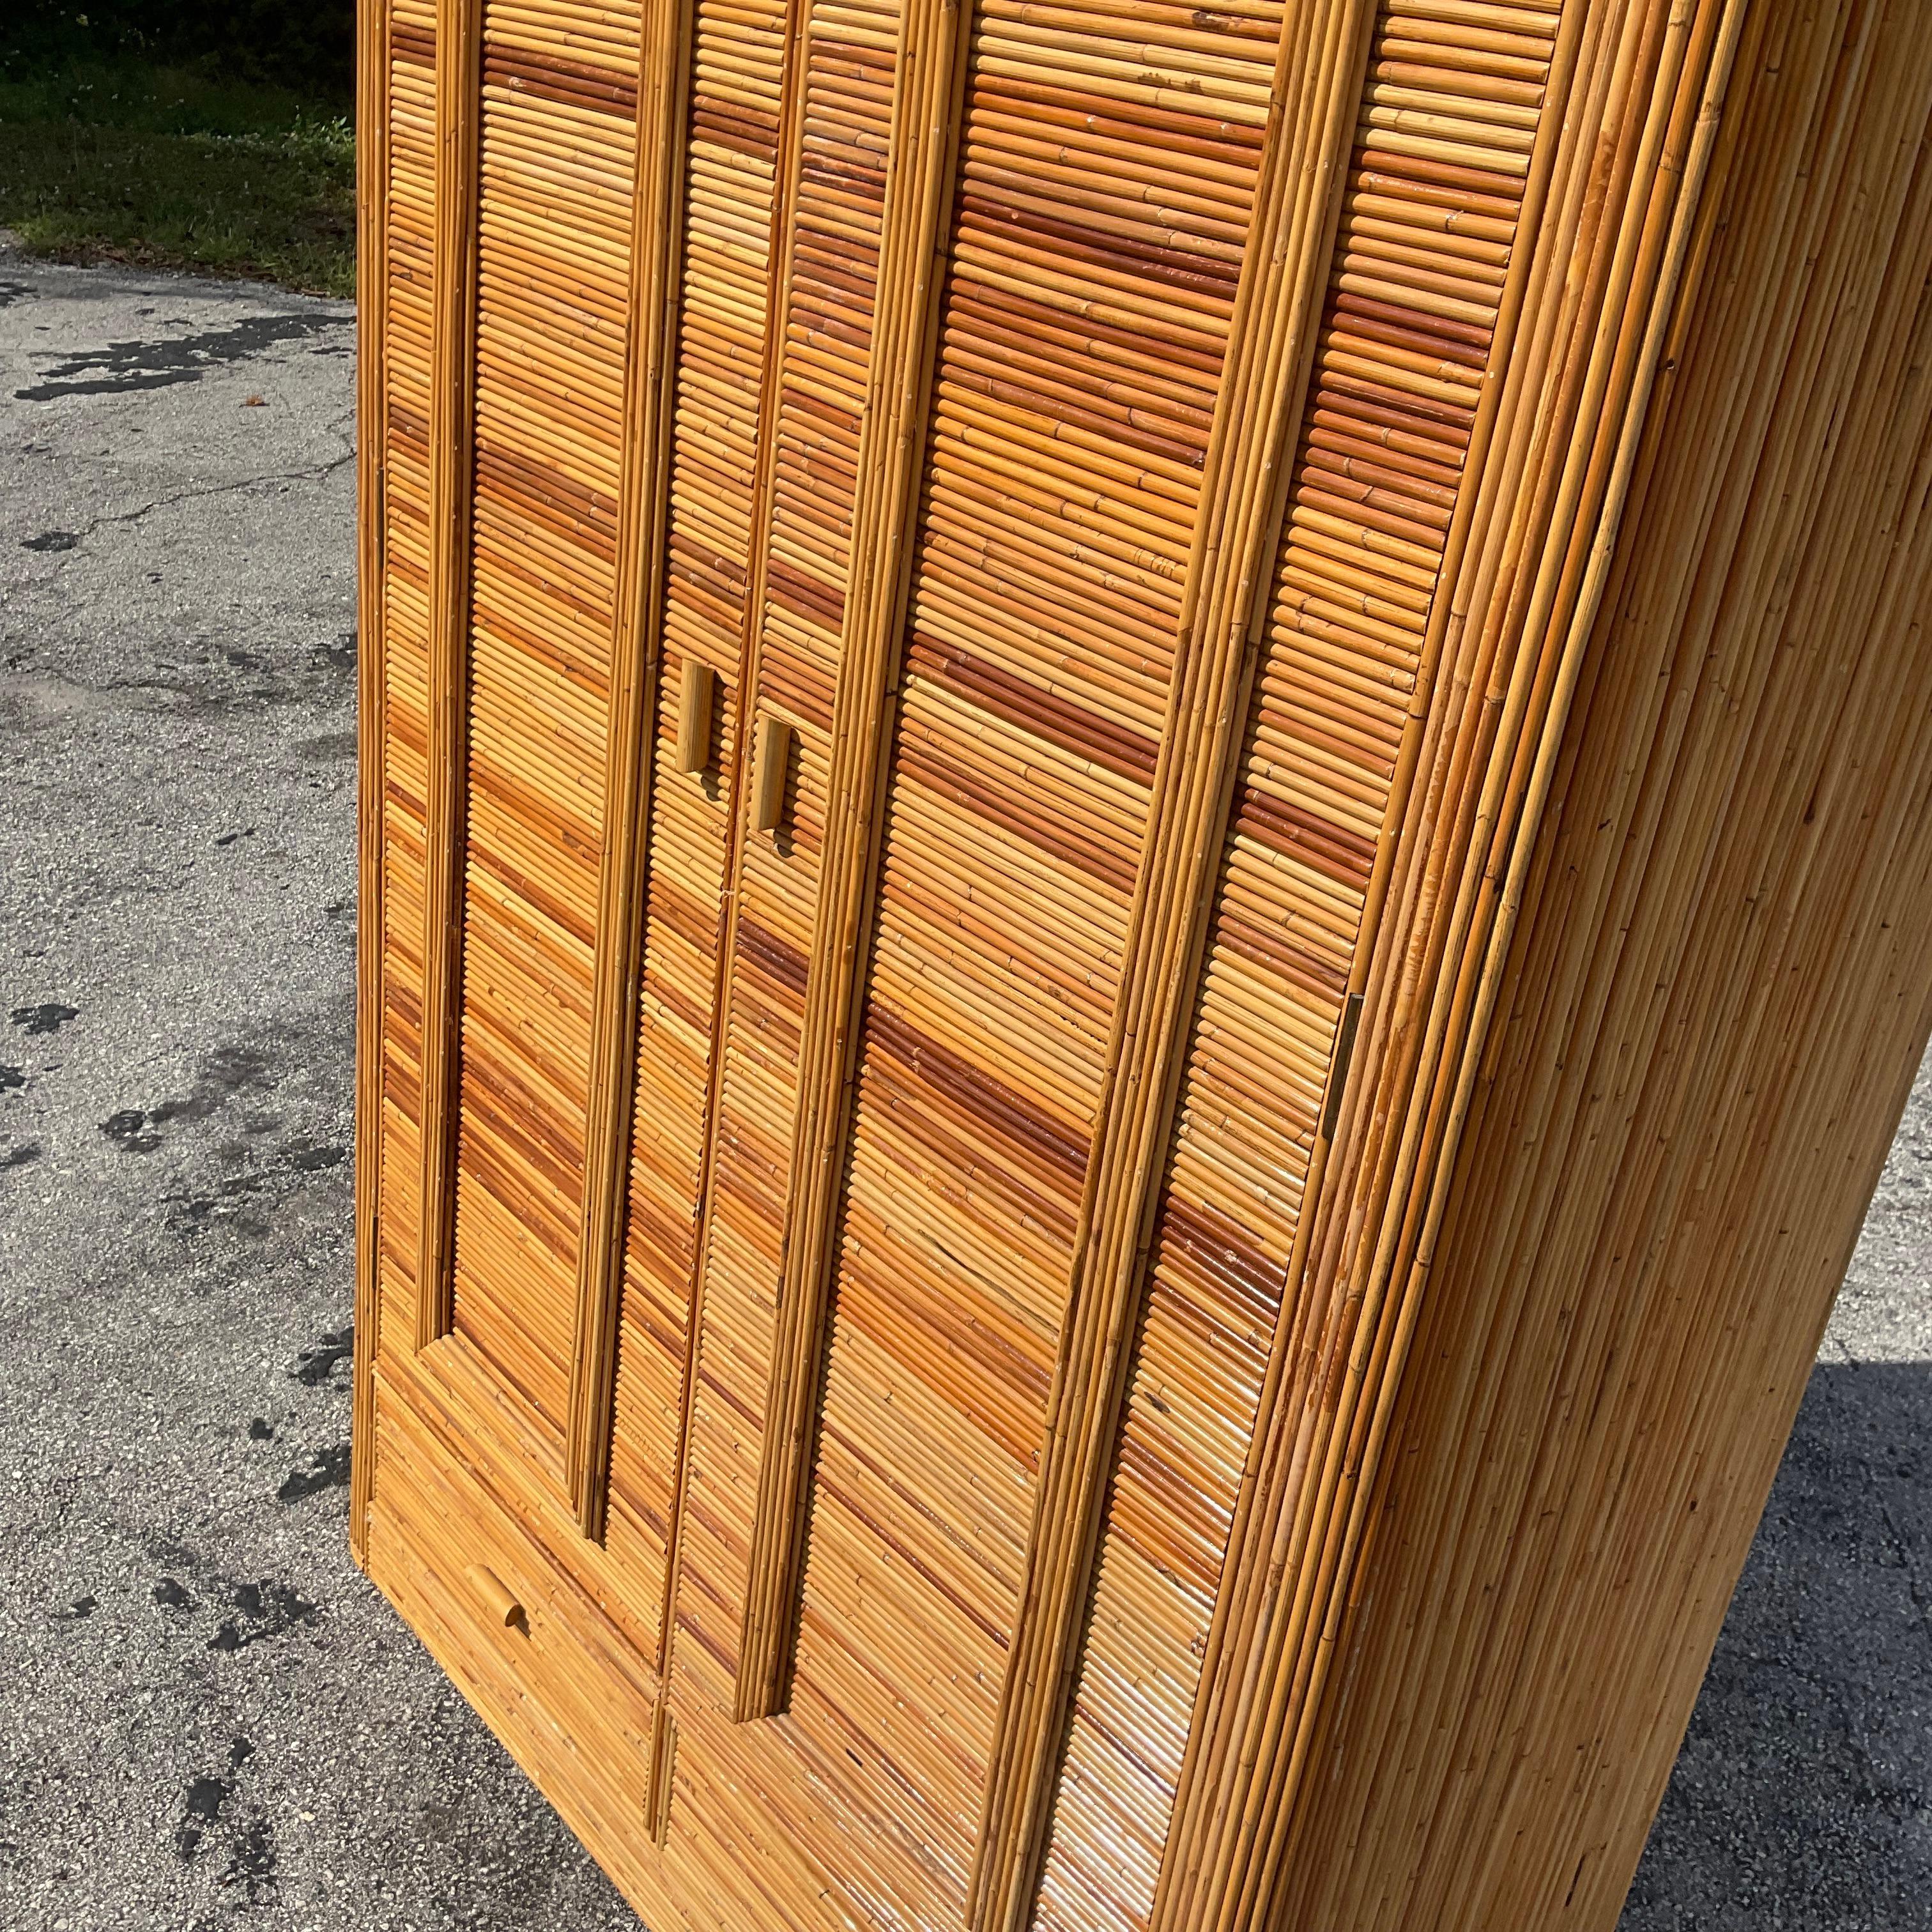 A fantastic vintage Coastal armoire. A chic pencil reed cabinet with a fabulous arched motif. A Double interior hang bar for lots of great storage. Acquired from a Palm Beach estate